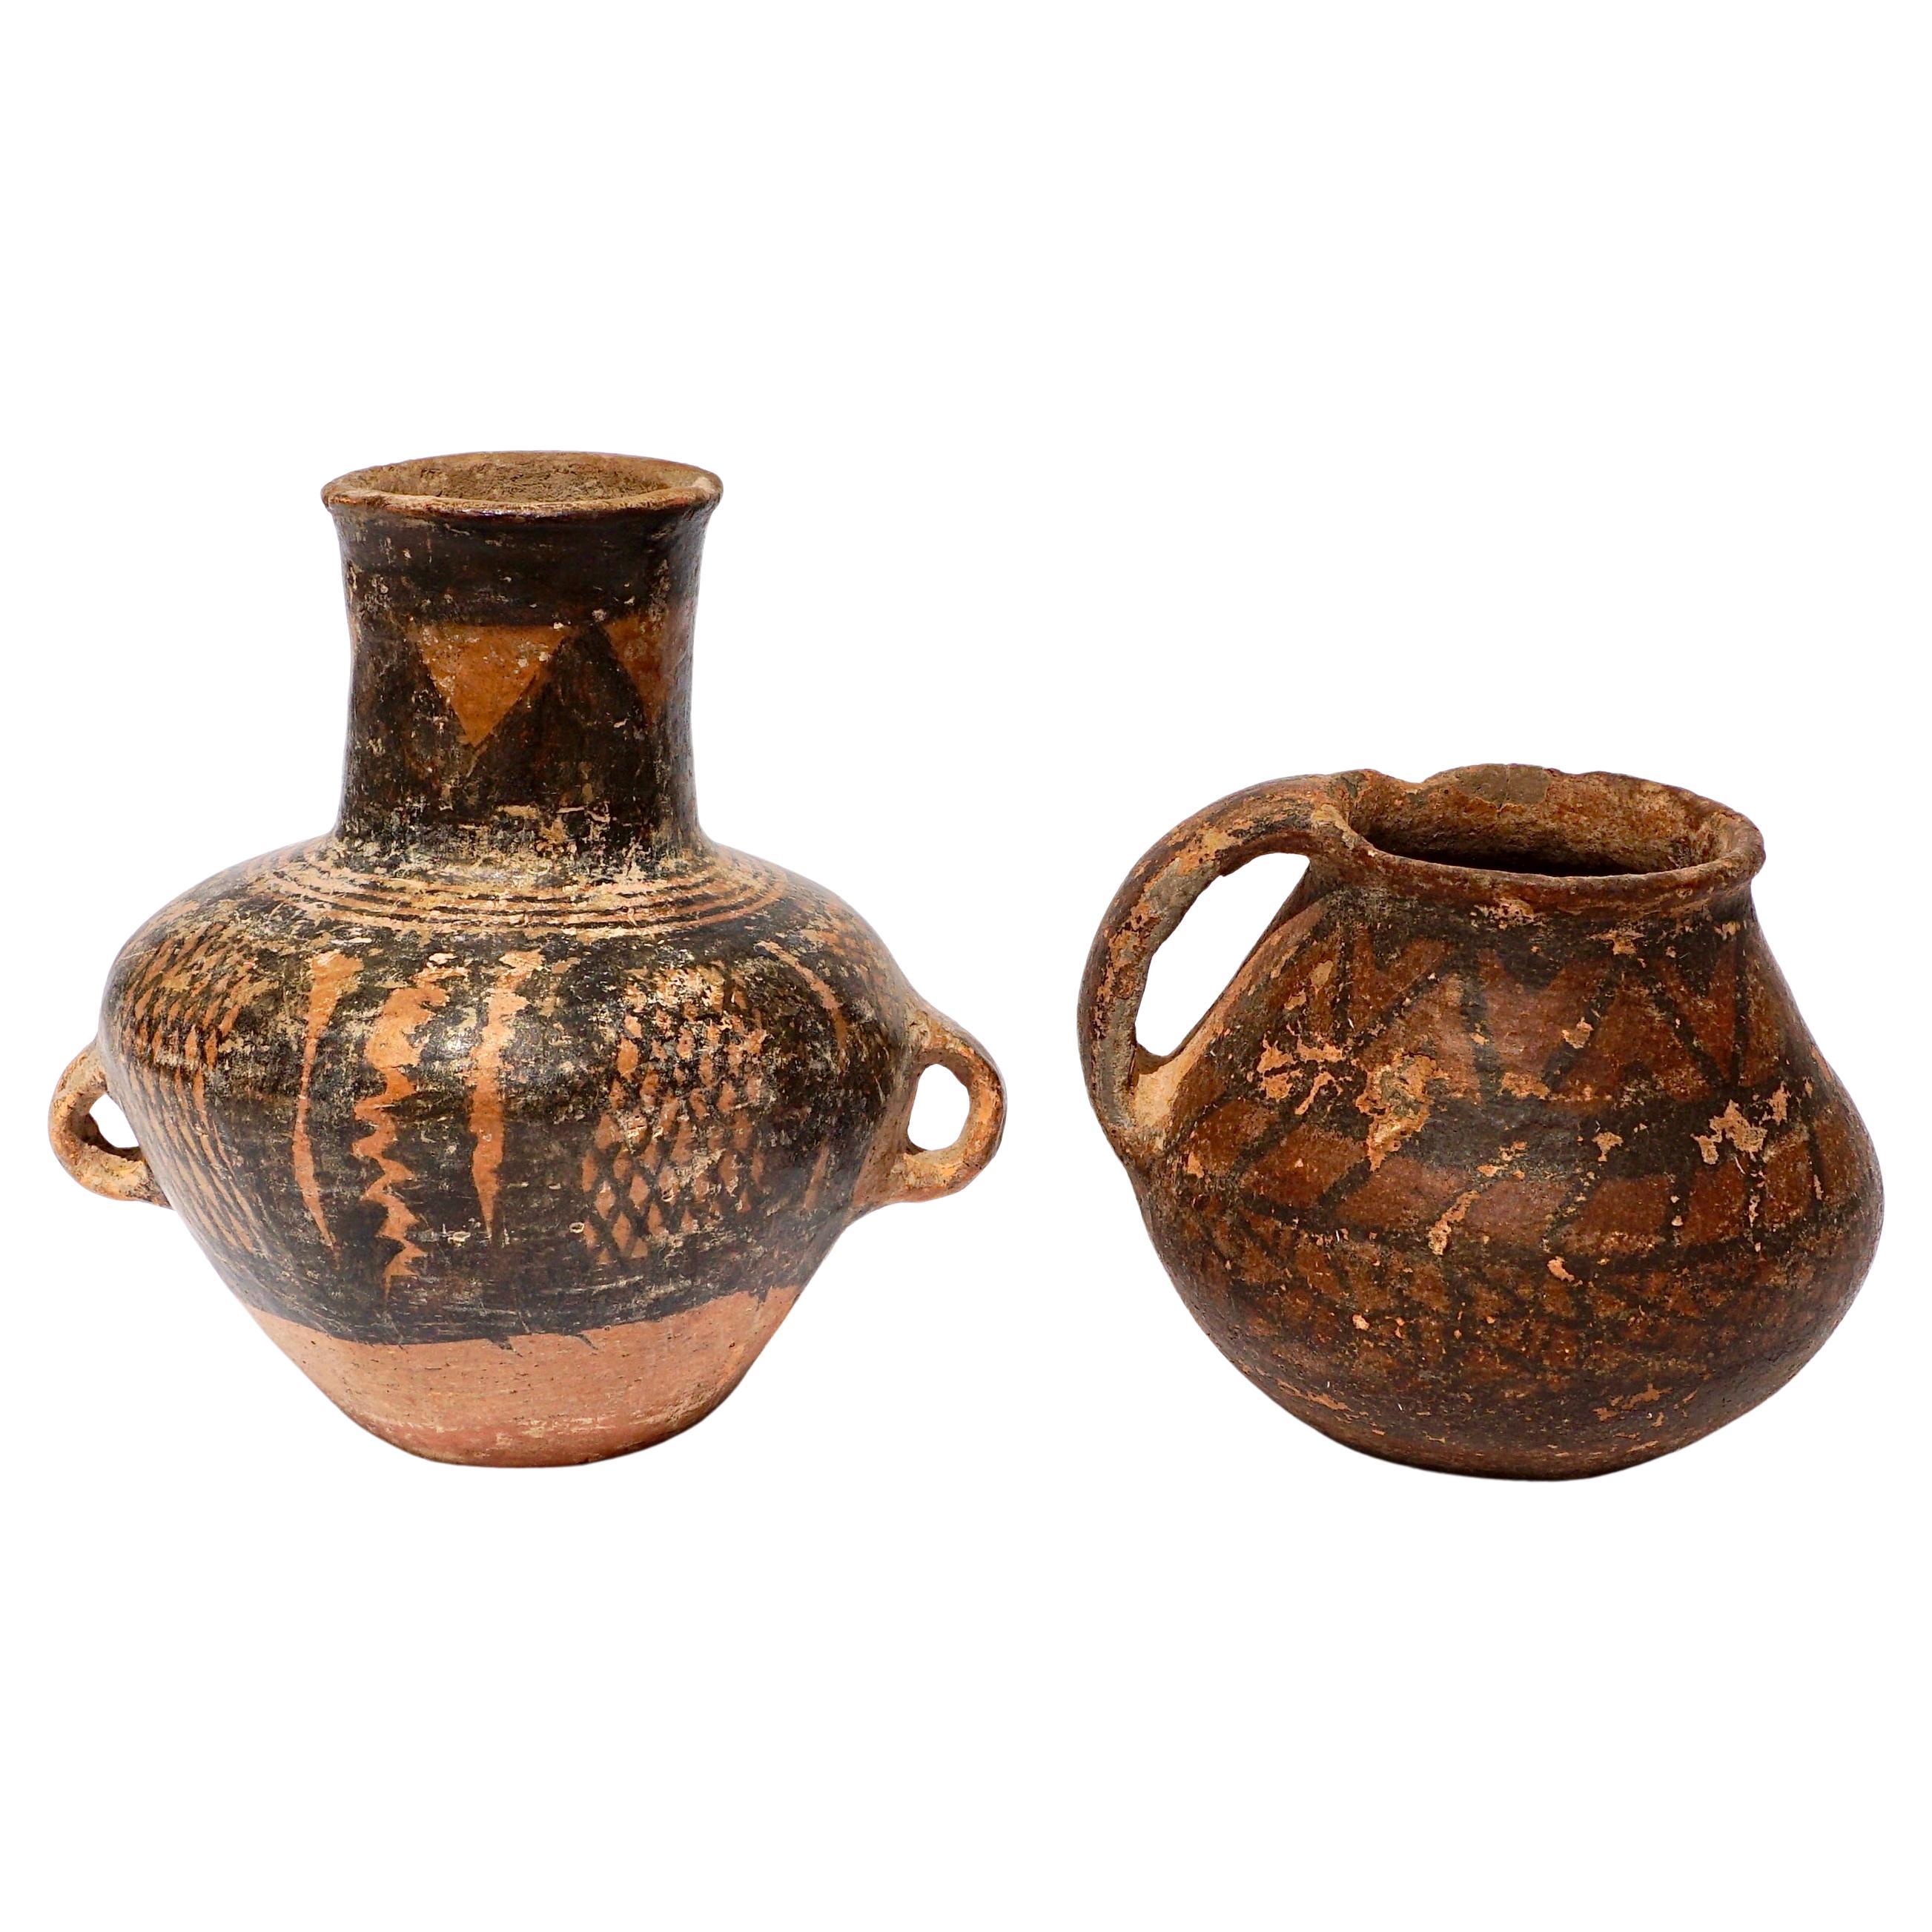 Chinese Neolithic Pottery Vases circa 3500 BCE